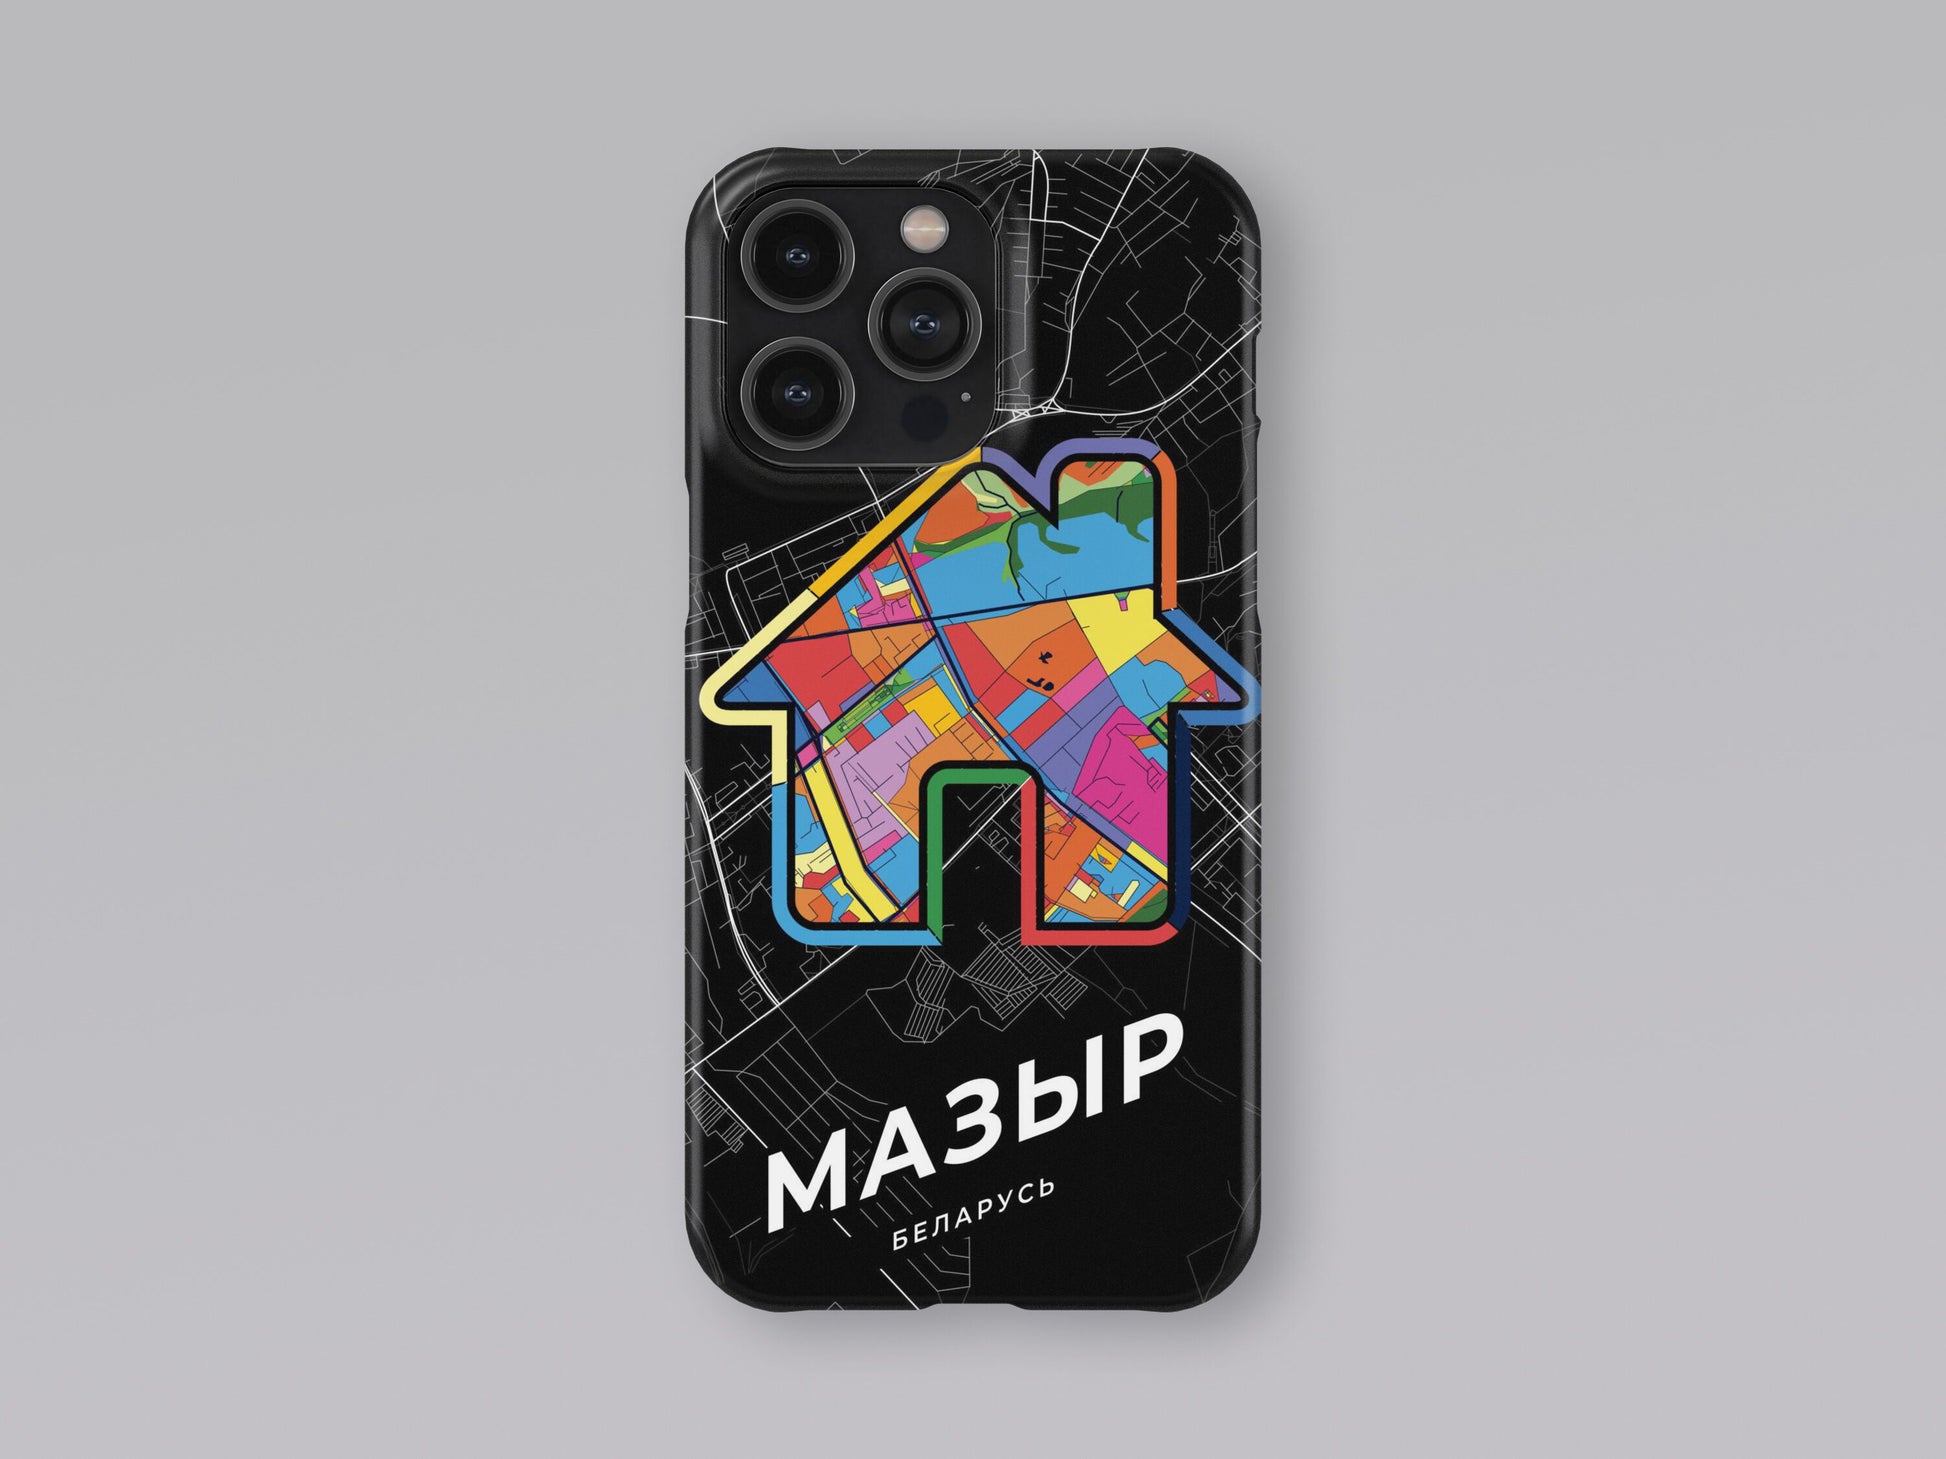 Мазыр Беларусь slim phone case with colorful icon 3